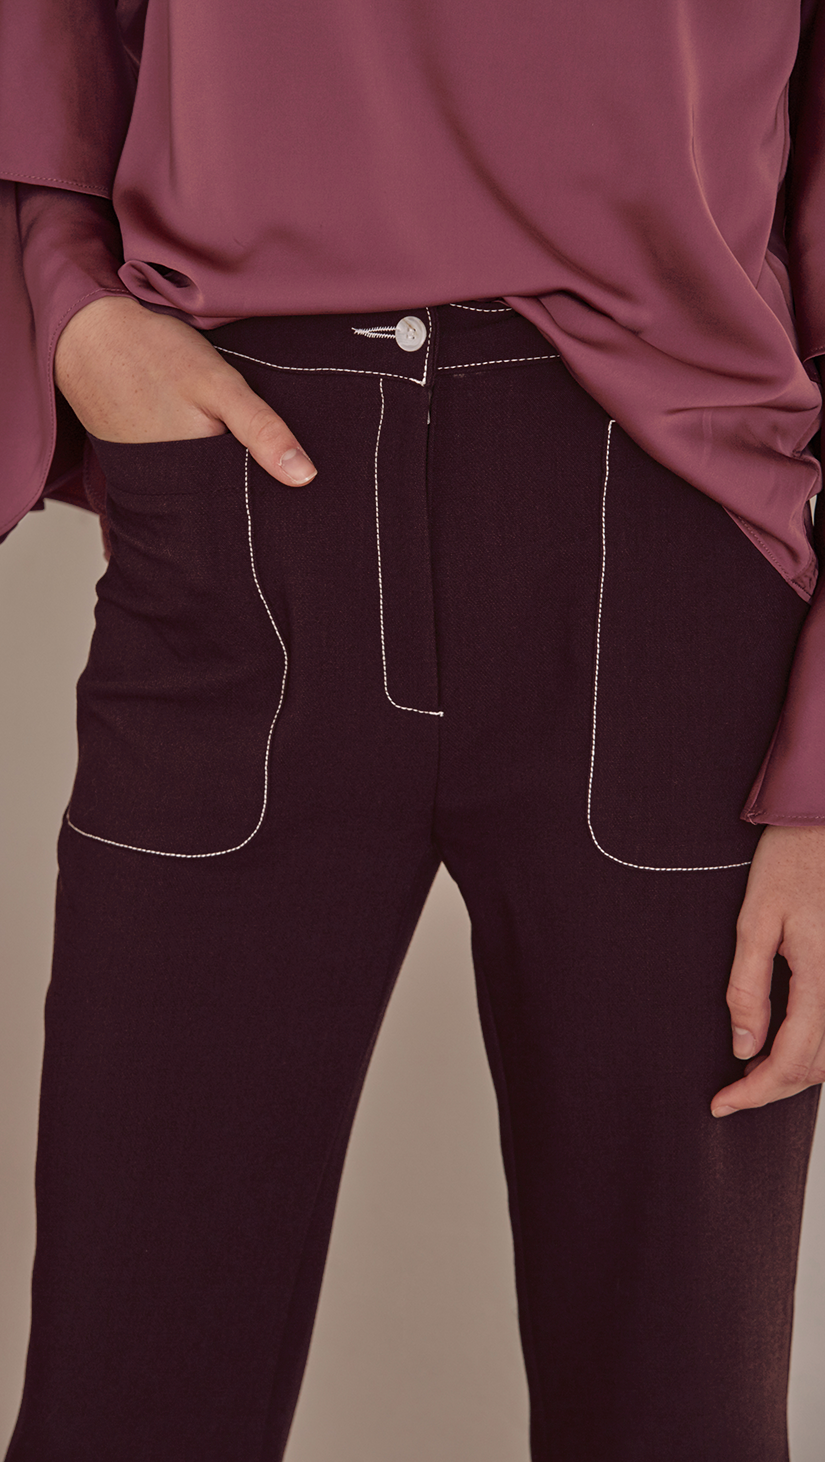 Rocha Pant in Wine. Two front pockets, zipper fly, tap closure. Styling in contrast white stitching. Straight cut, flare out hem. Cut for a slim fit. 